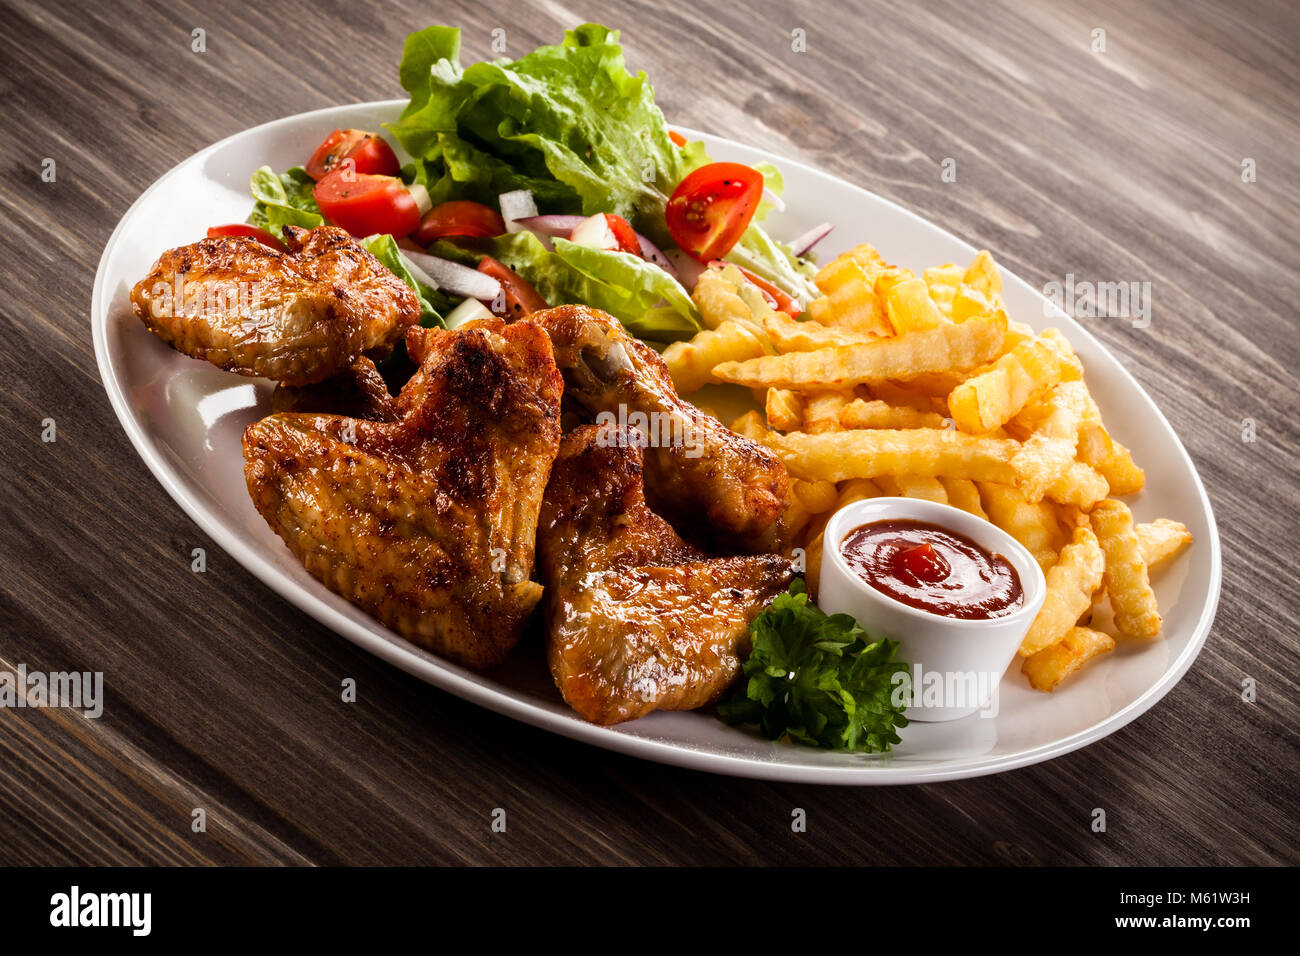 Chicken Wings French Fries Salad Stock Photos & Chicken Wings French ...